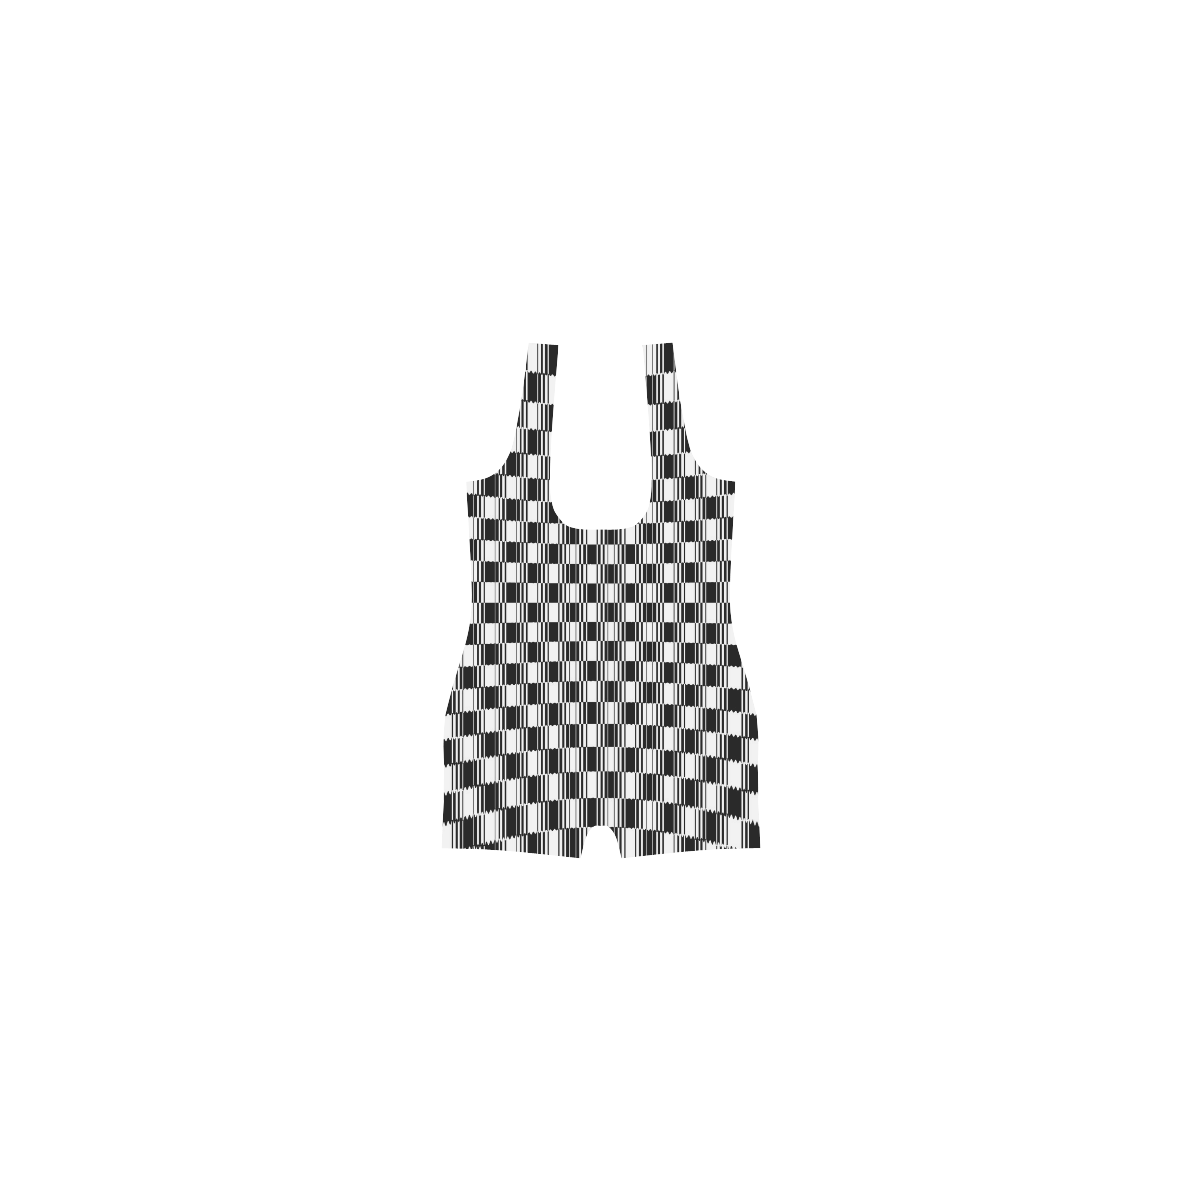 BLACK AND WHITE TILED Classic One Piece Swimwear (Model S03)